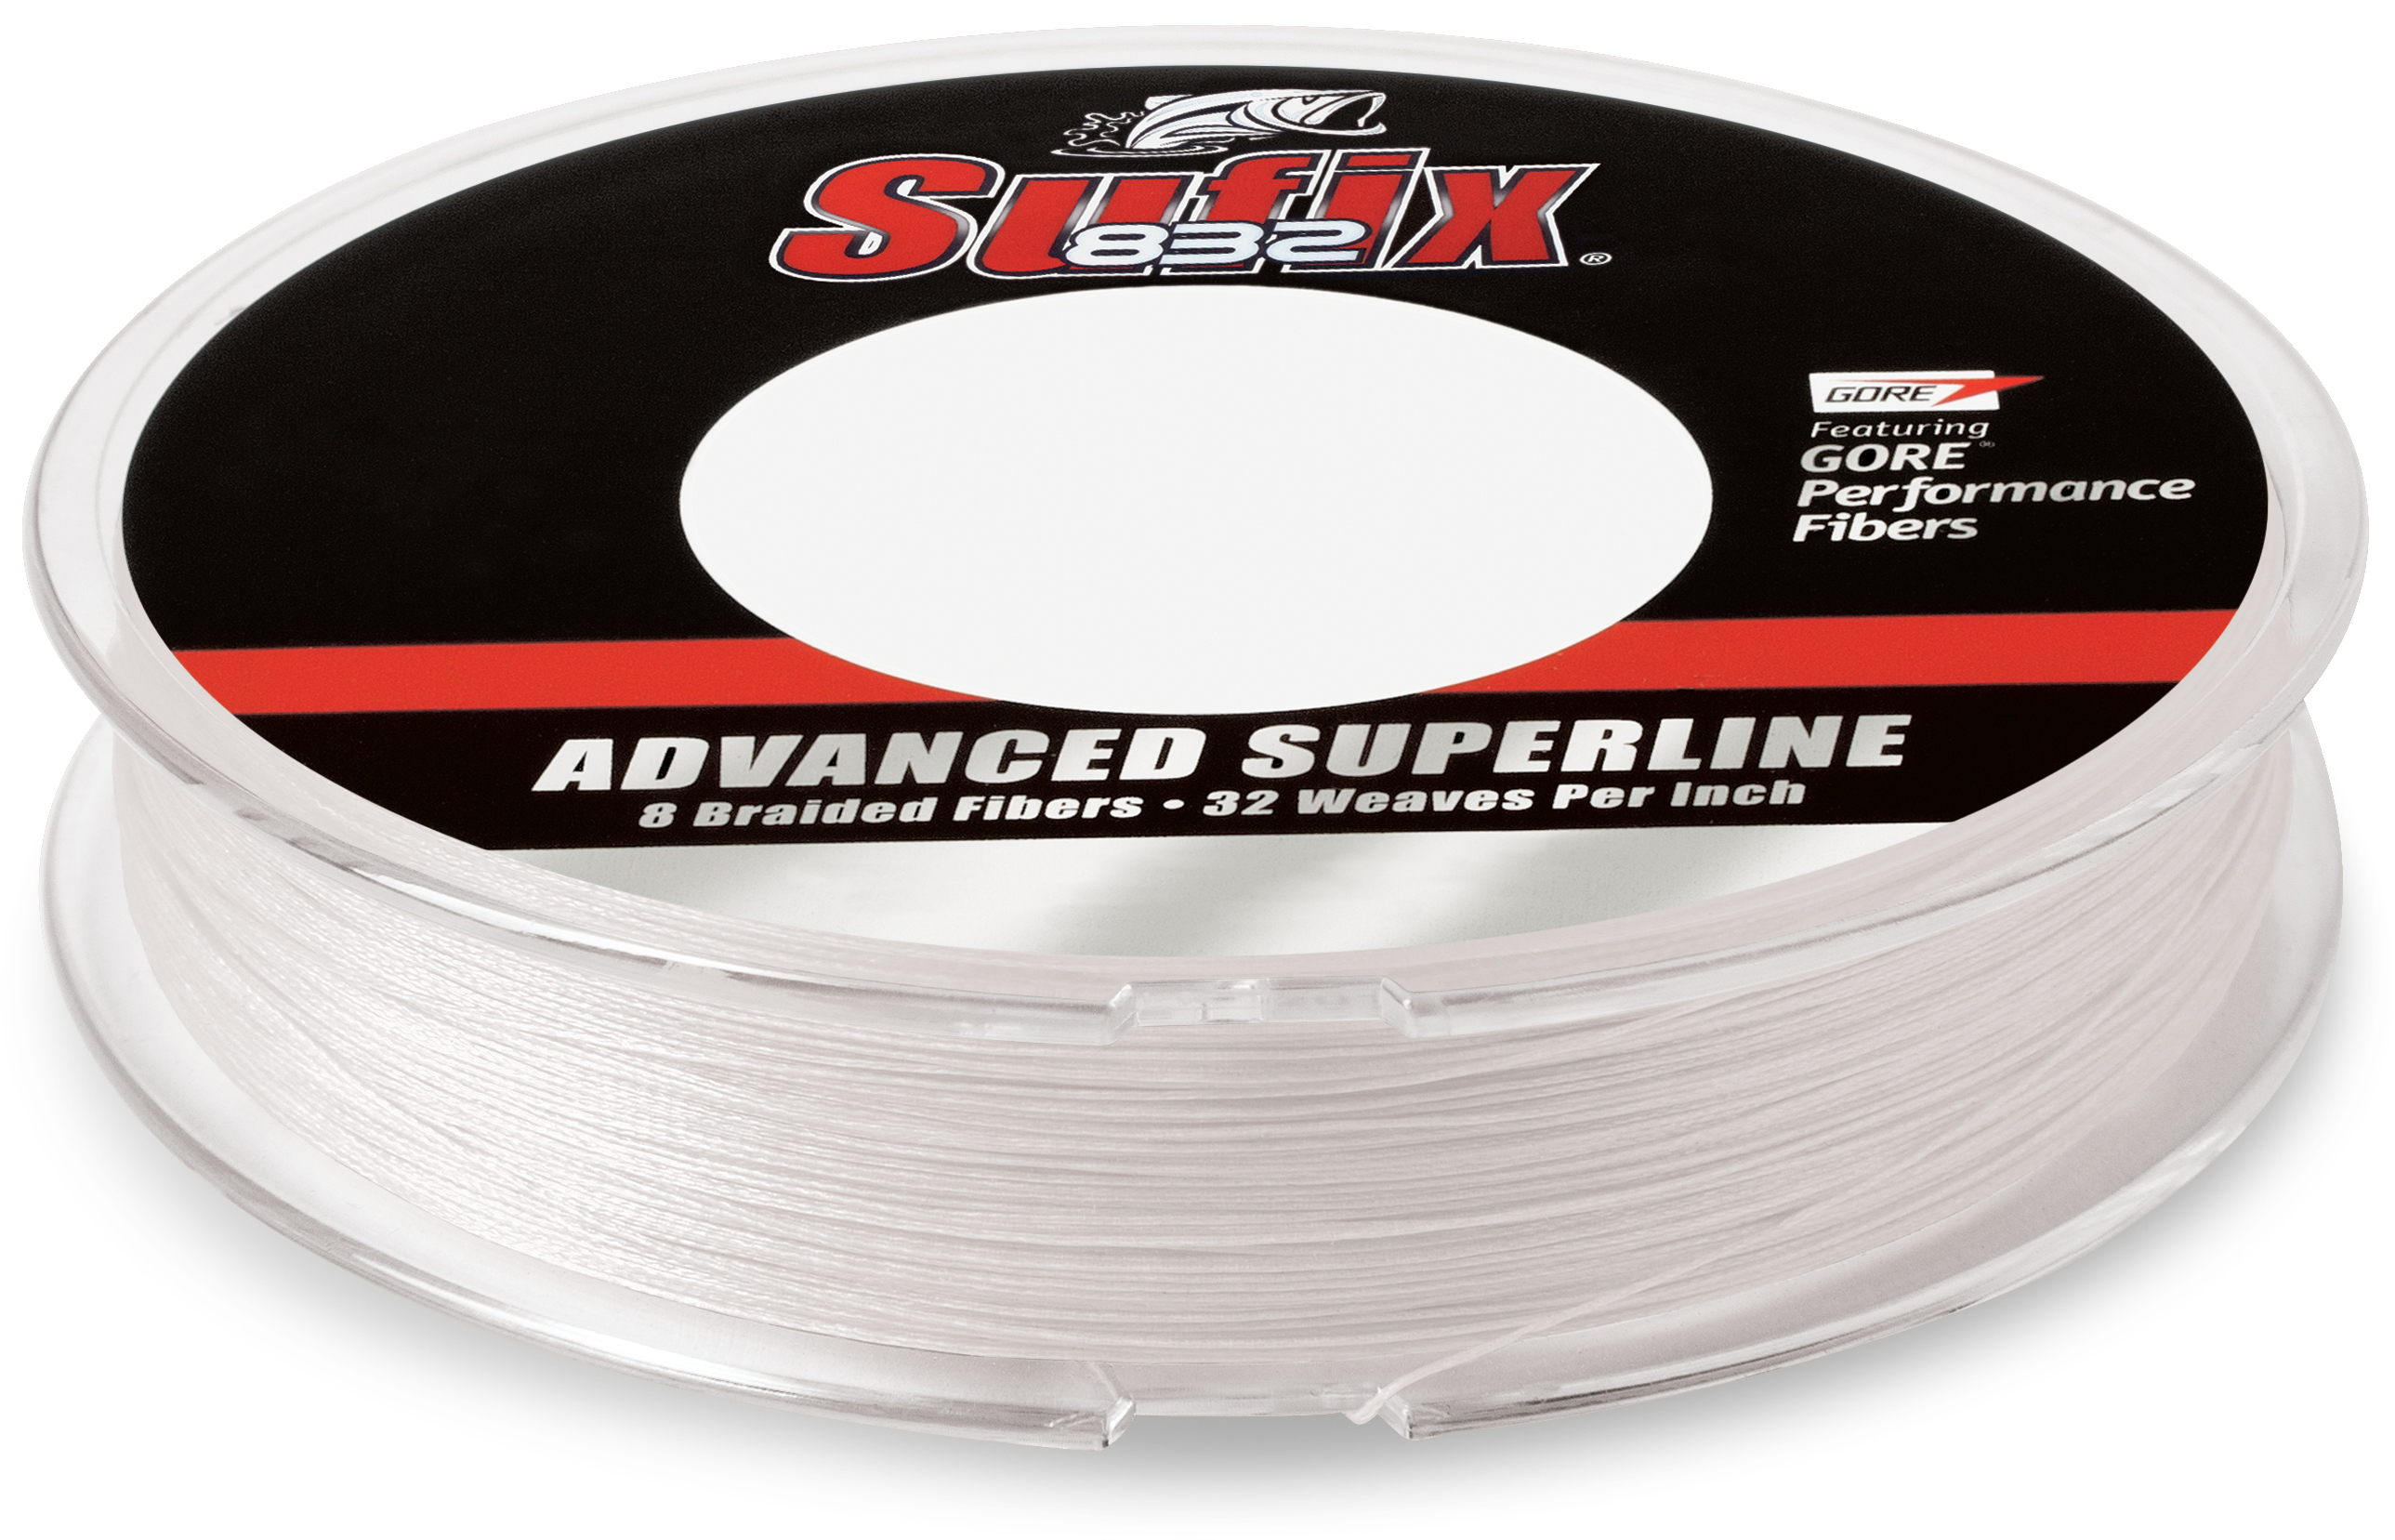  Sufix 832 Braid 80 lb Ghost 150 yards : Superbraid And Braided  Fishing Line : Sports & Outdoors